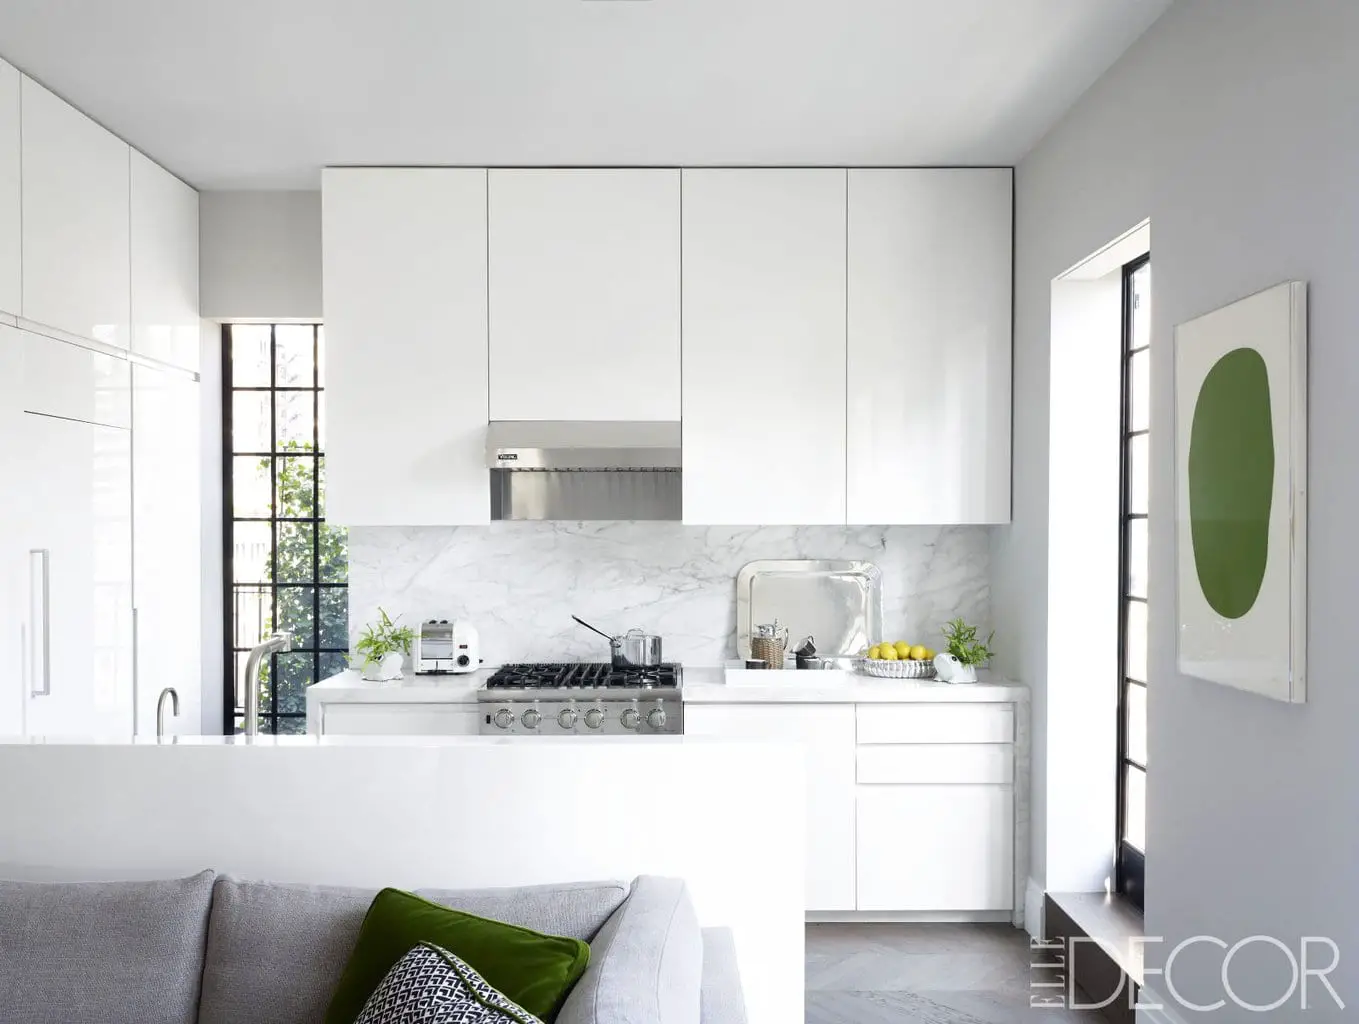 A sleek modern all-white kitchen in a New York City penthouse.